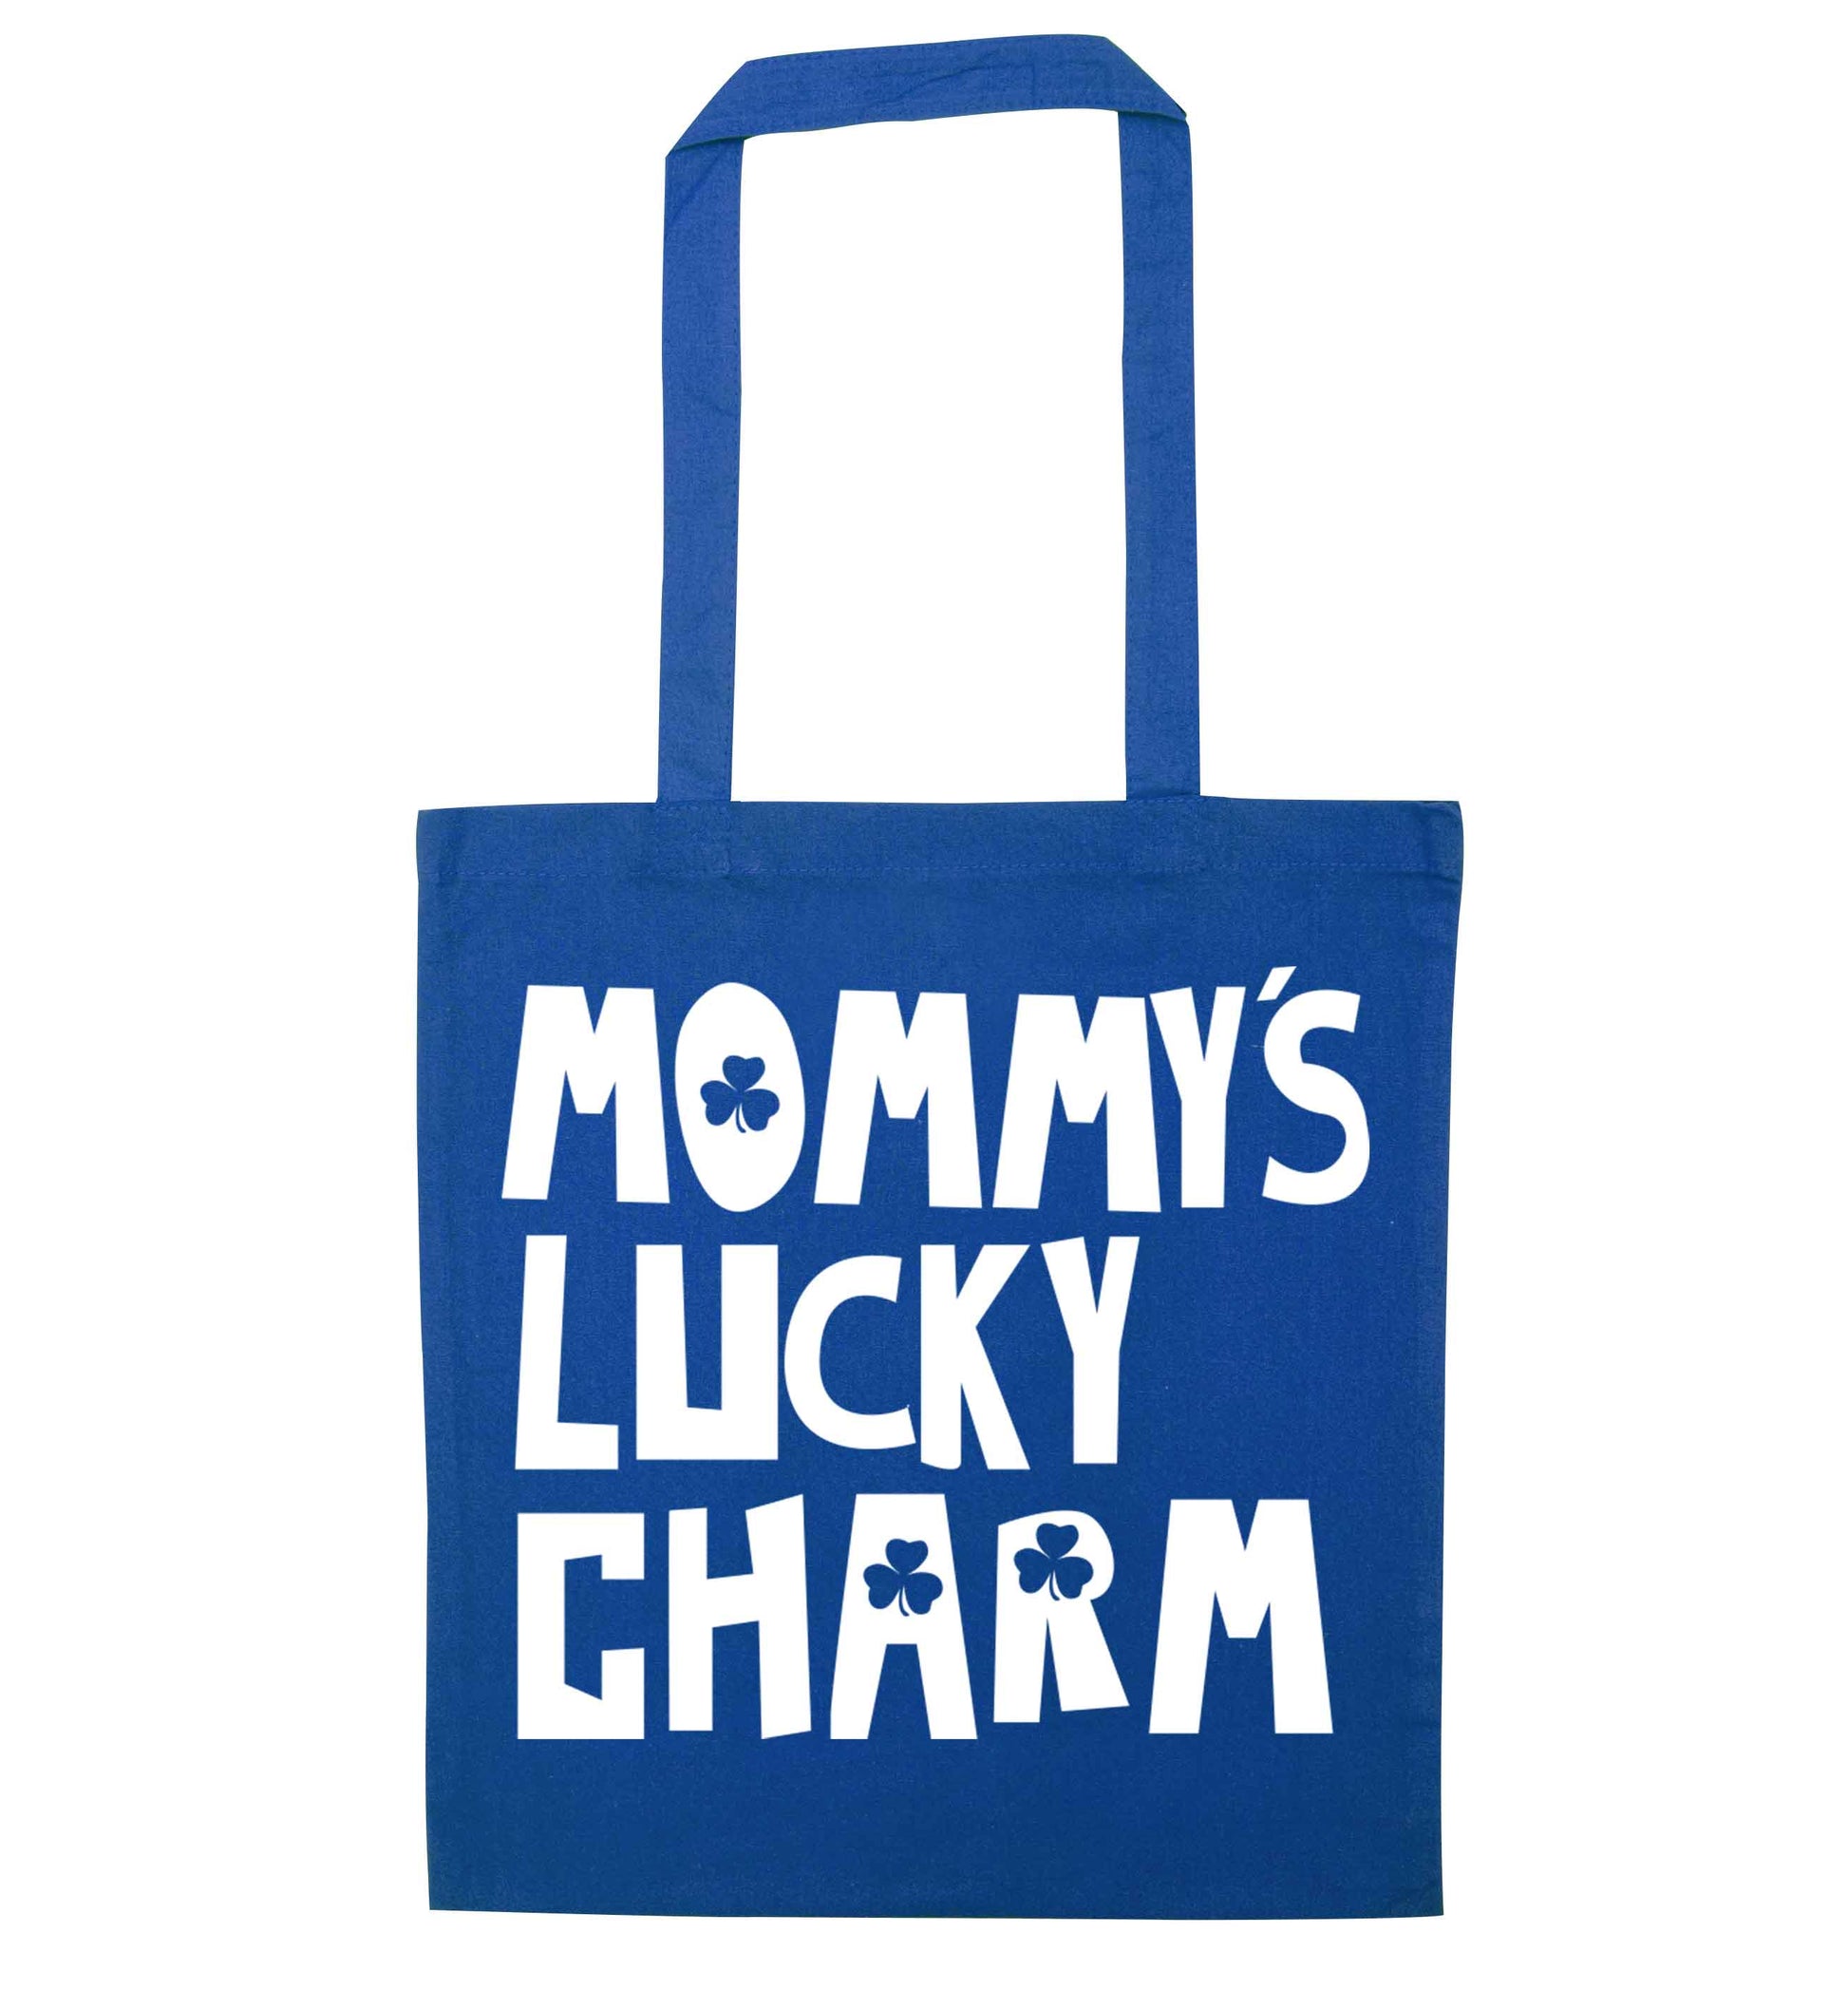 Mommy's lucky charm blue tote bag